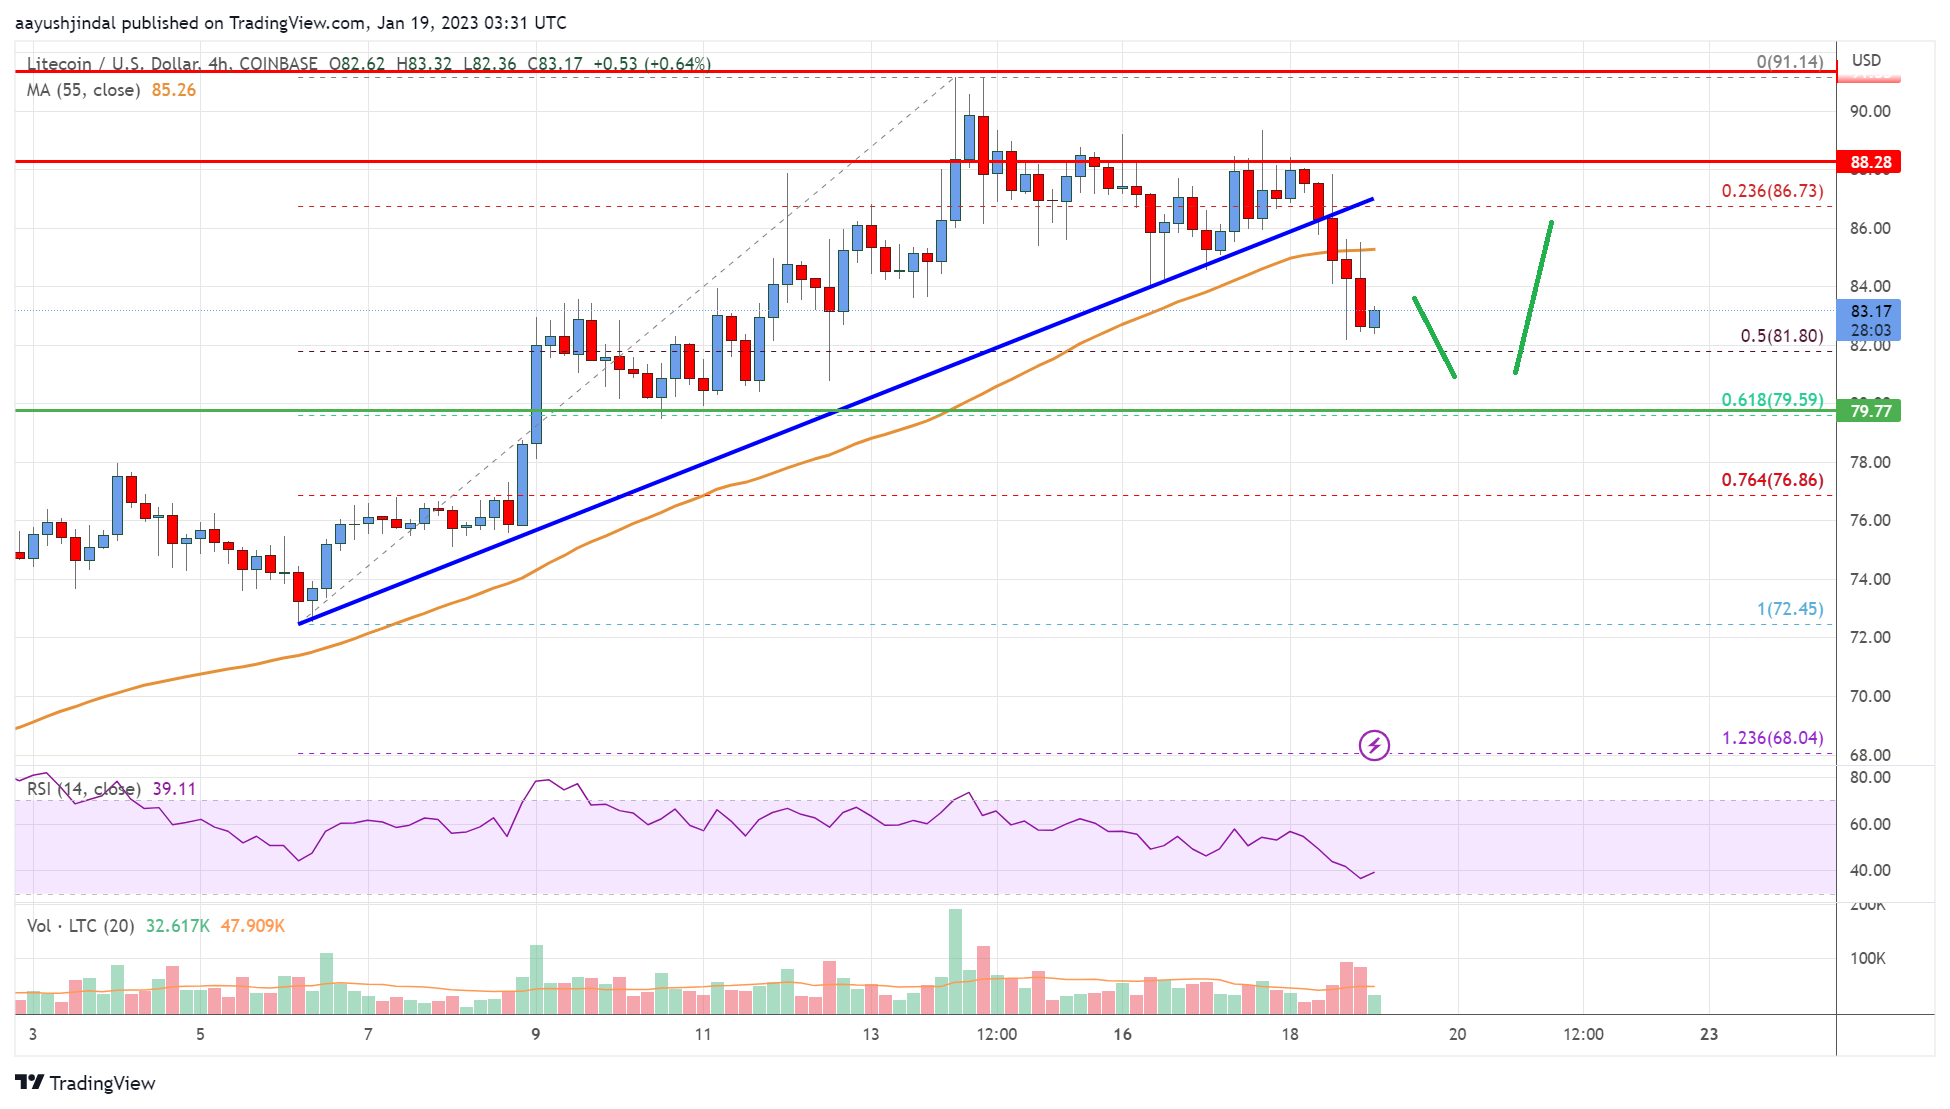 Litecoin (LTC) Price Analysis: Bulls Could Be Active Near $80